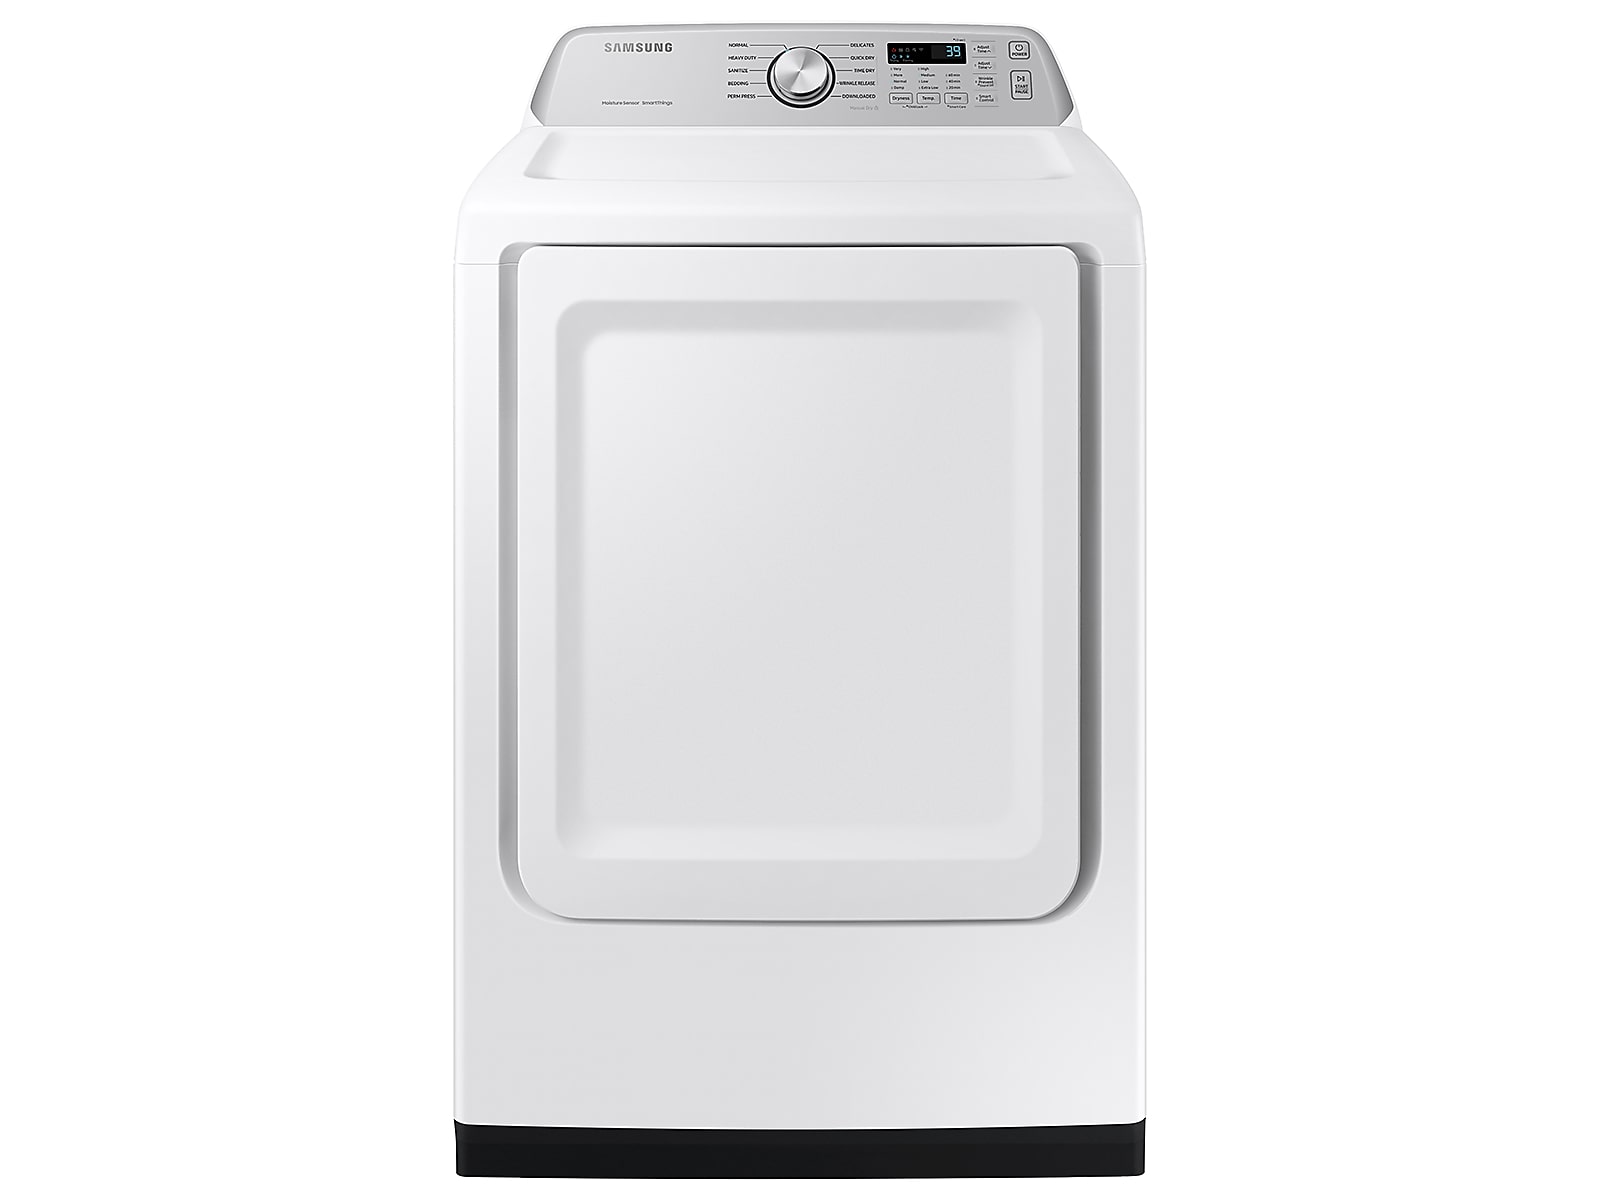 Samsung 7.4 cu. ft. Smart Gas Dryer with Sensor Dry in White(DVG47CG3500WA3)